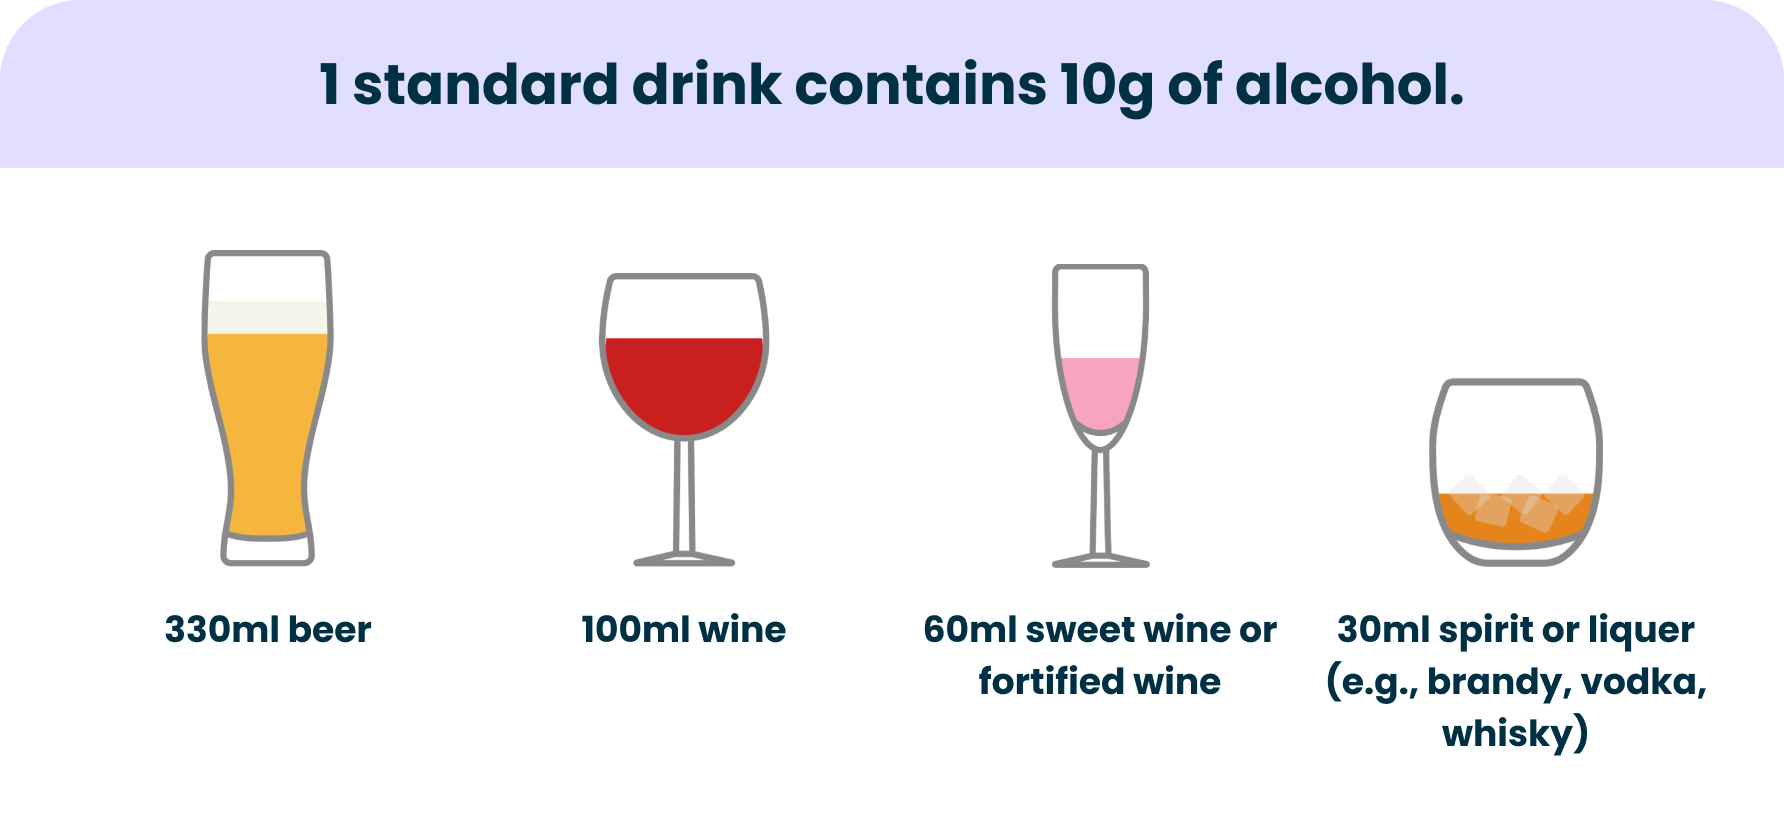 1 standard drink contains 10g of alcohol